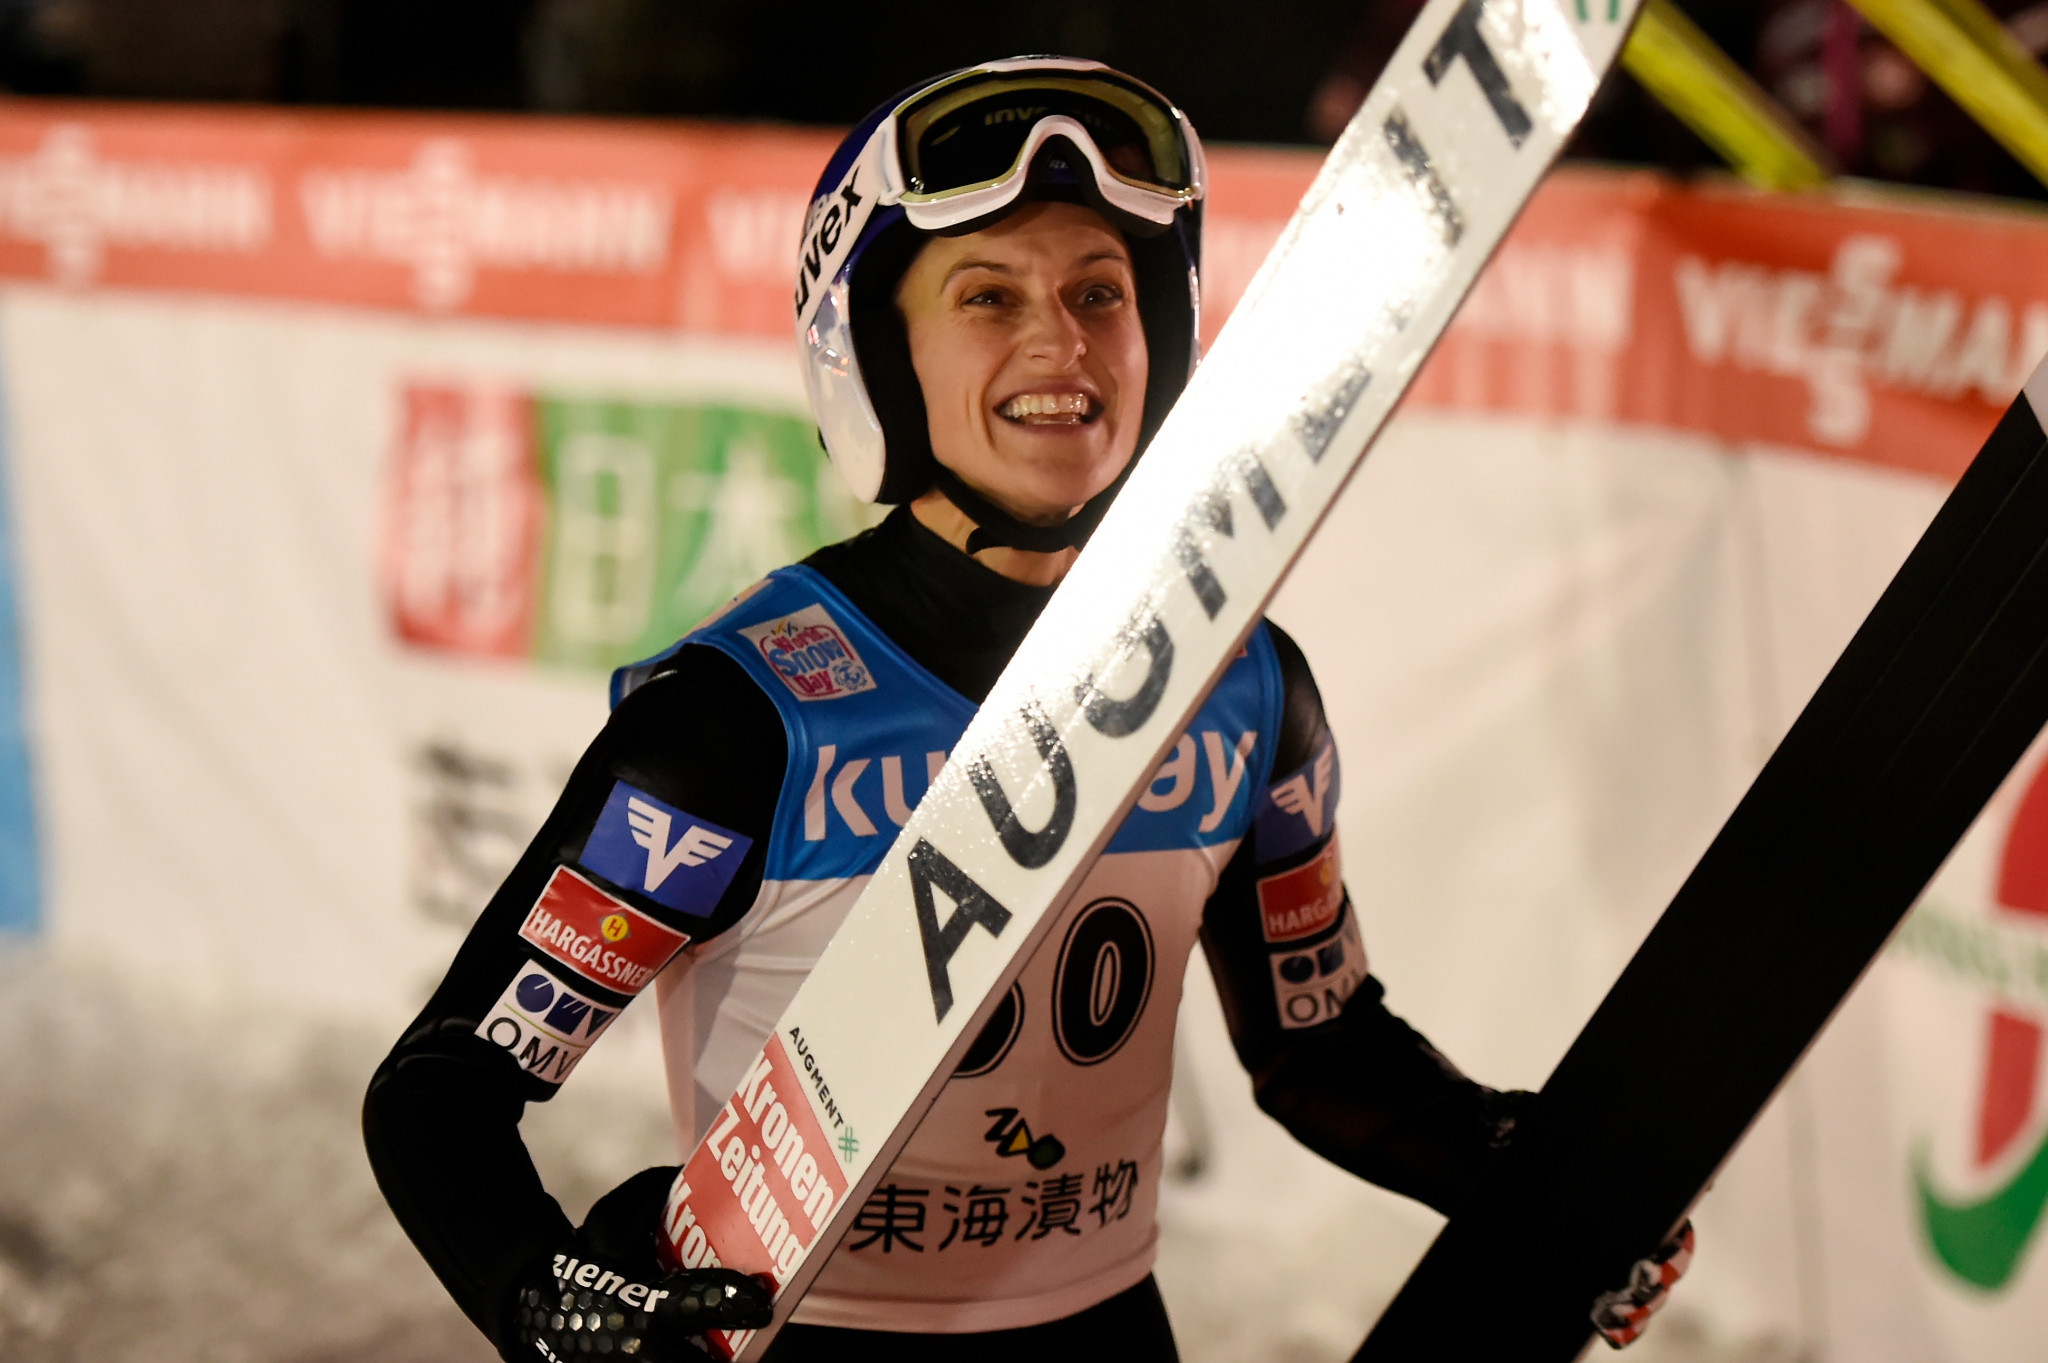 Pinkelnig wins again in Japan to move within point of Women's Ski Jumping World Cup lead